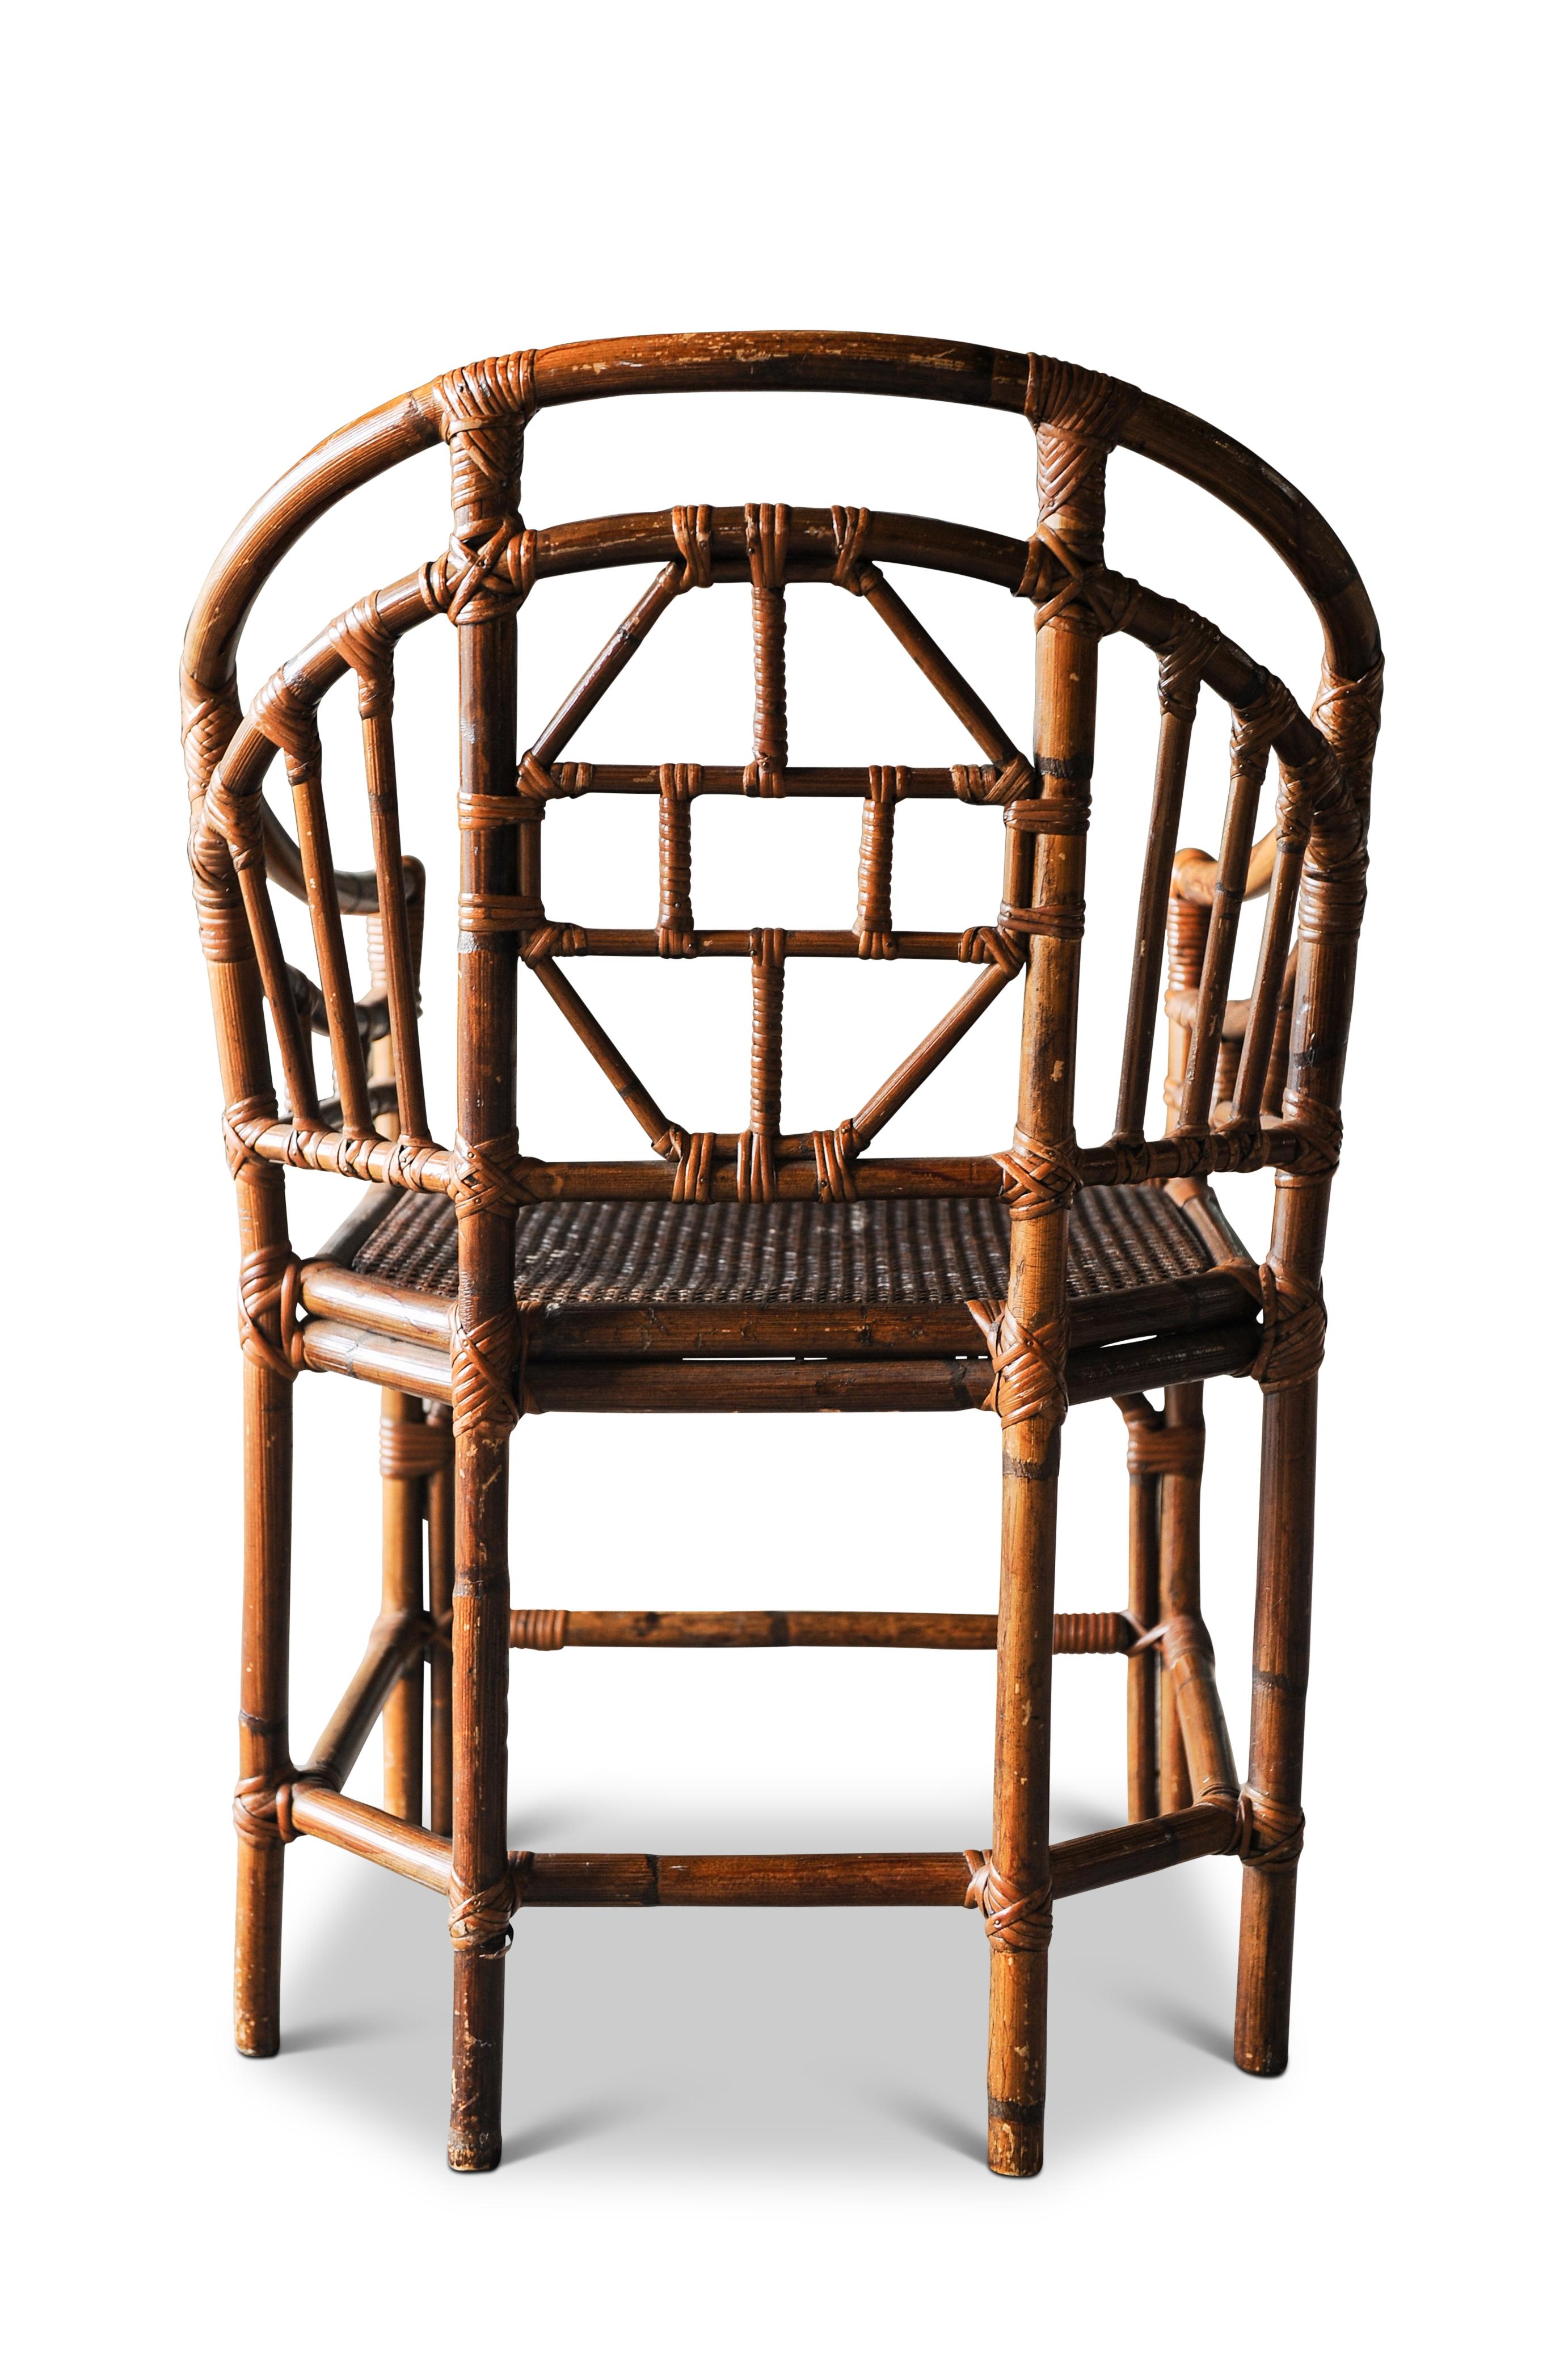 An early 20th century Victorian Chinese Chippendale faux bamboo conservatory armchair.

In architecture, Chinese Chippendale refers to a specific kind of railing or balustrade that was inspired by the 